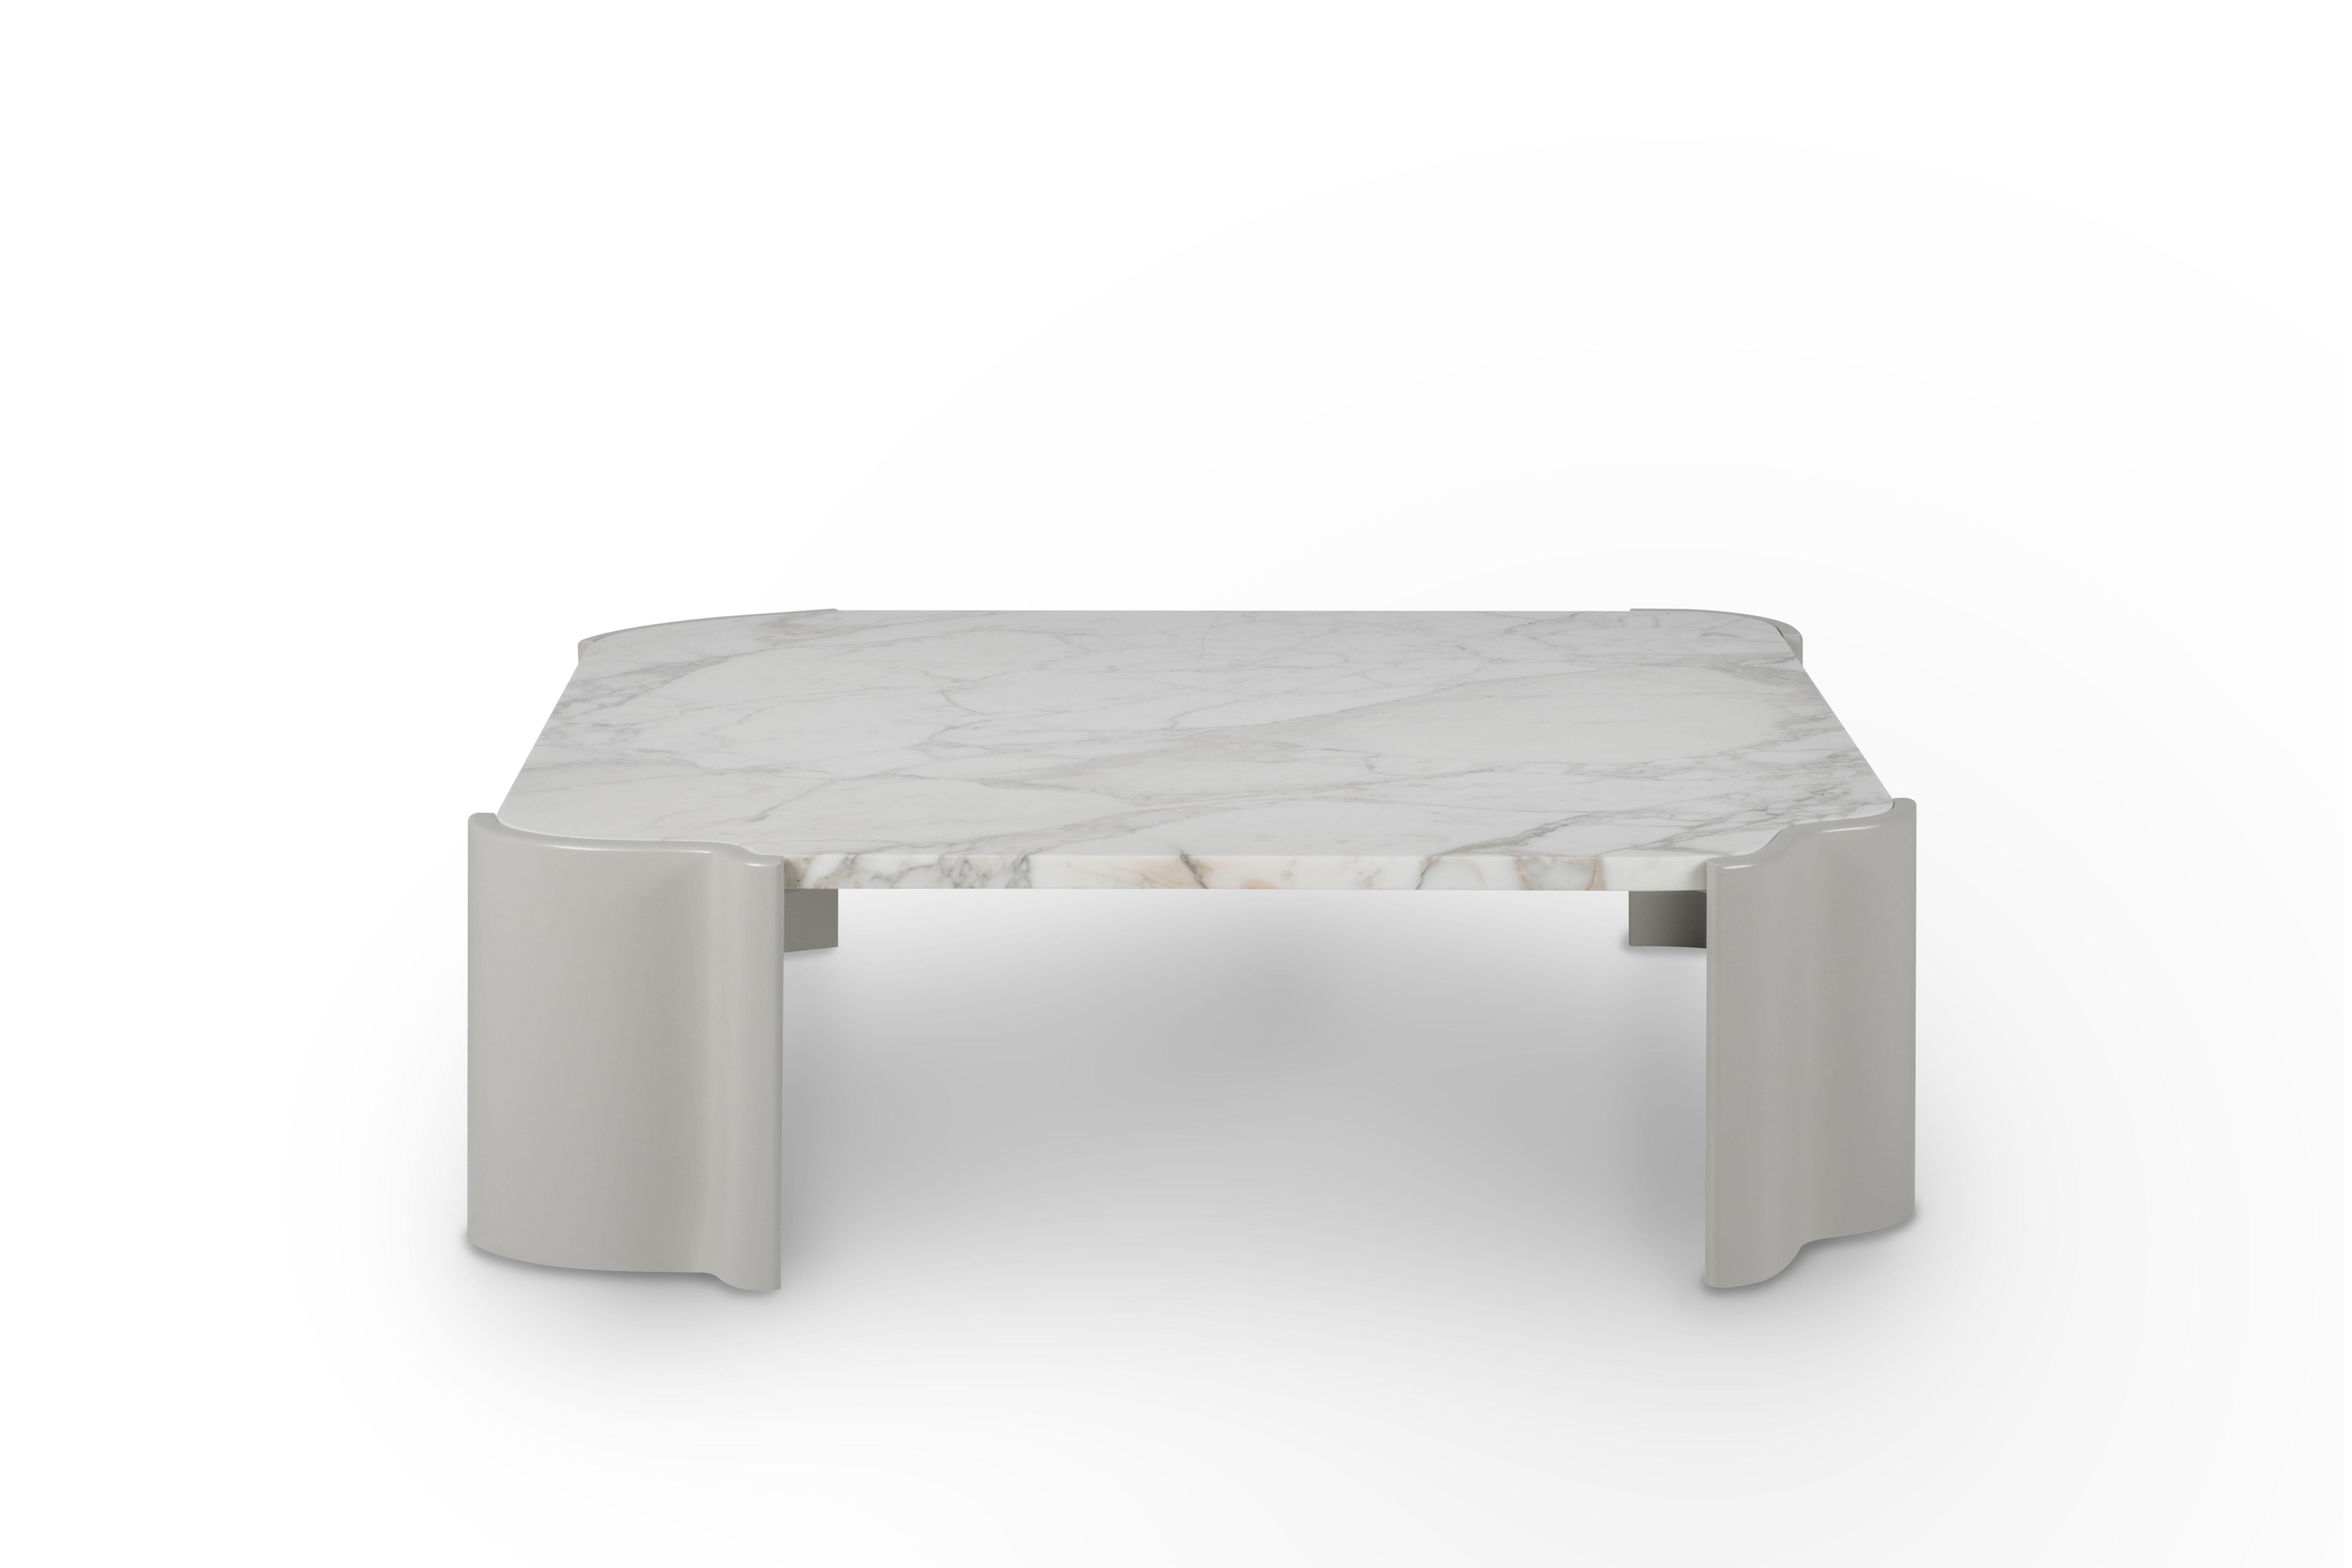 Salemas coffee table, Contemporary Collection, Handcrafted in Portugal - Europe by Greenpple.

Salemas coffee table was designed to enhance the serene interior spaces of your home with its neutral colours and aesthetic. The lush stone texture of the